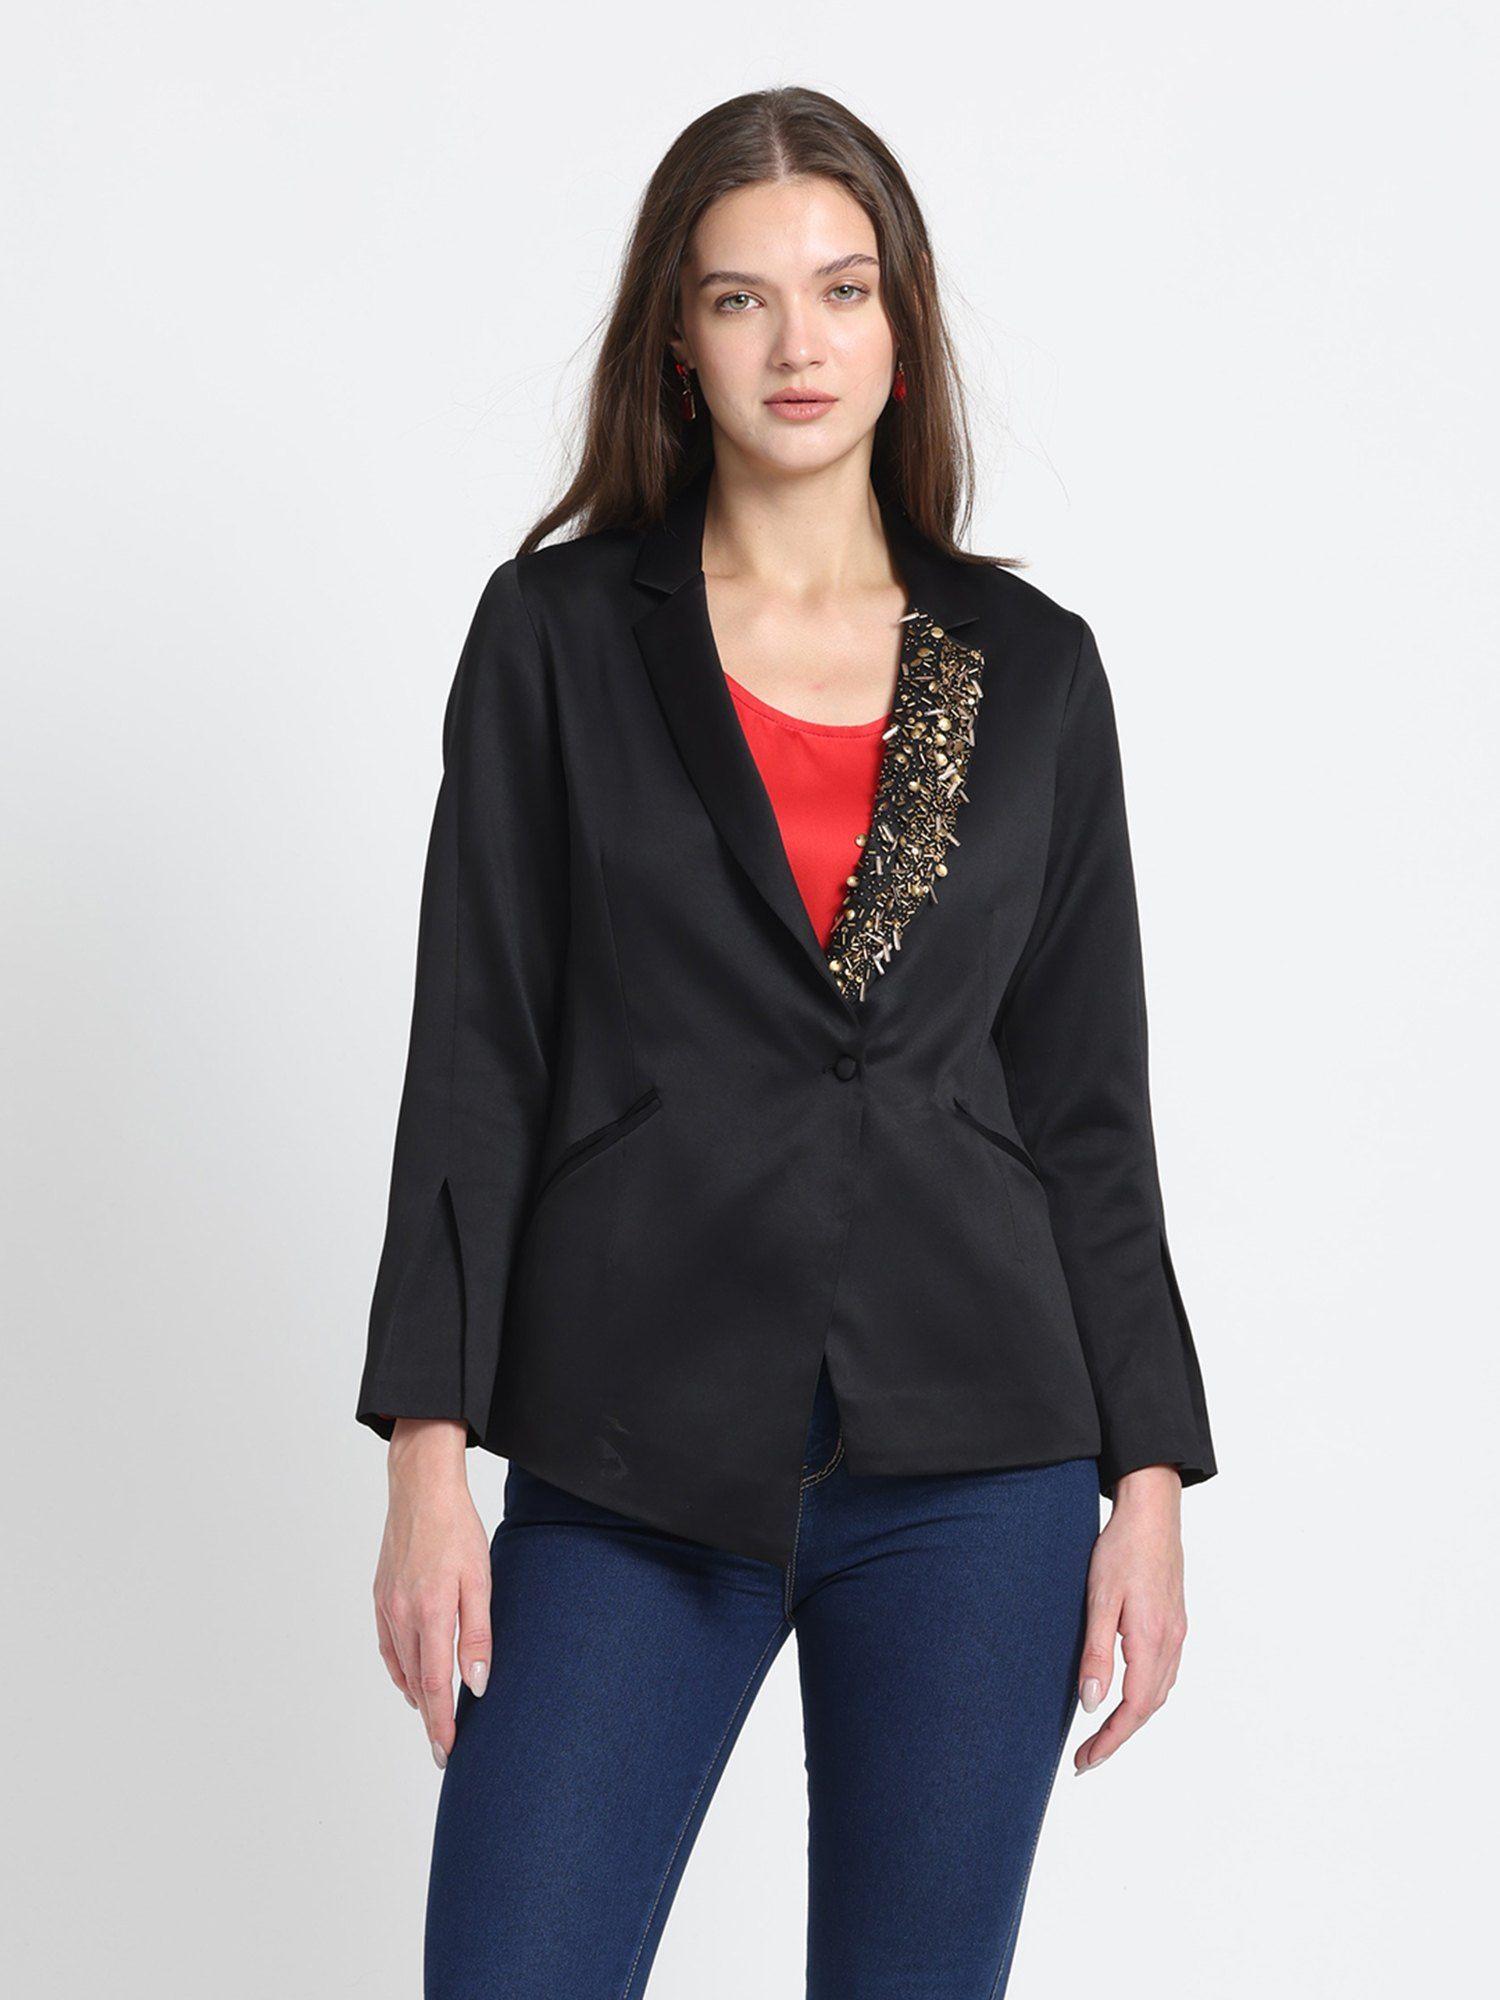 notched lapel collar black solid full sleeves party blazer for women